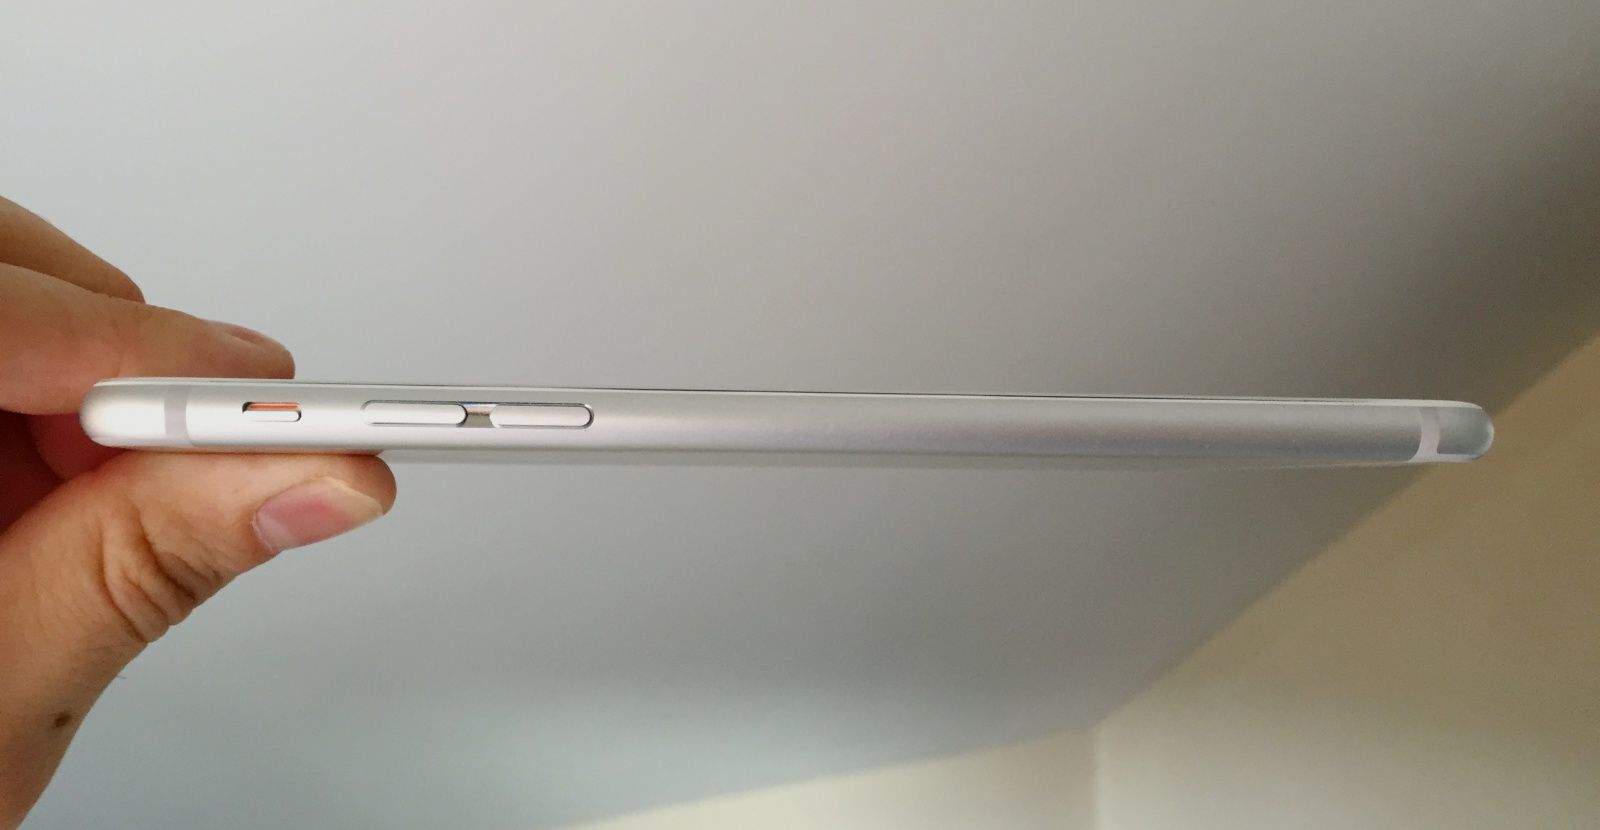 Is your iPhone 6 Plus still as straight as it was the day you got it? Photo: Killian Bell/Cult of Mac